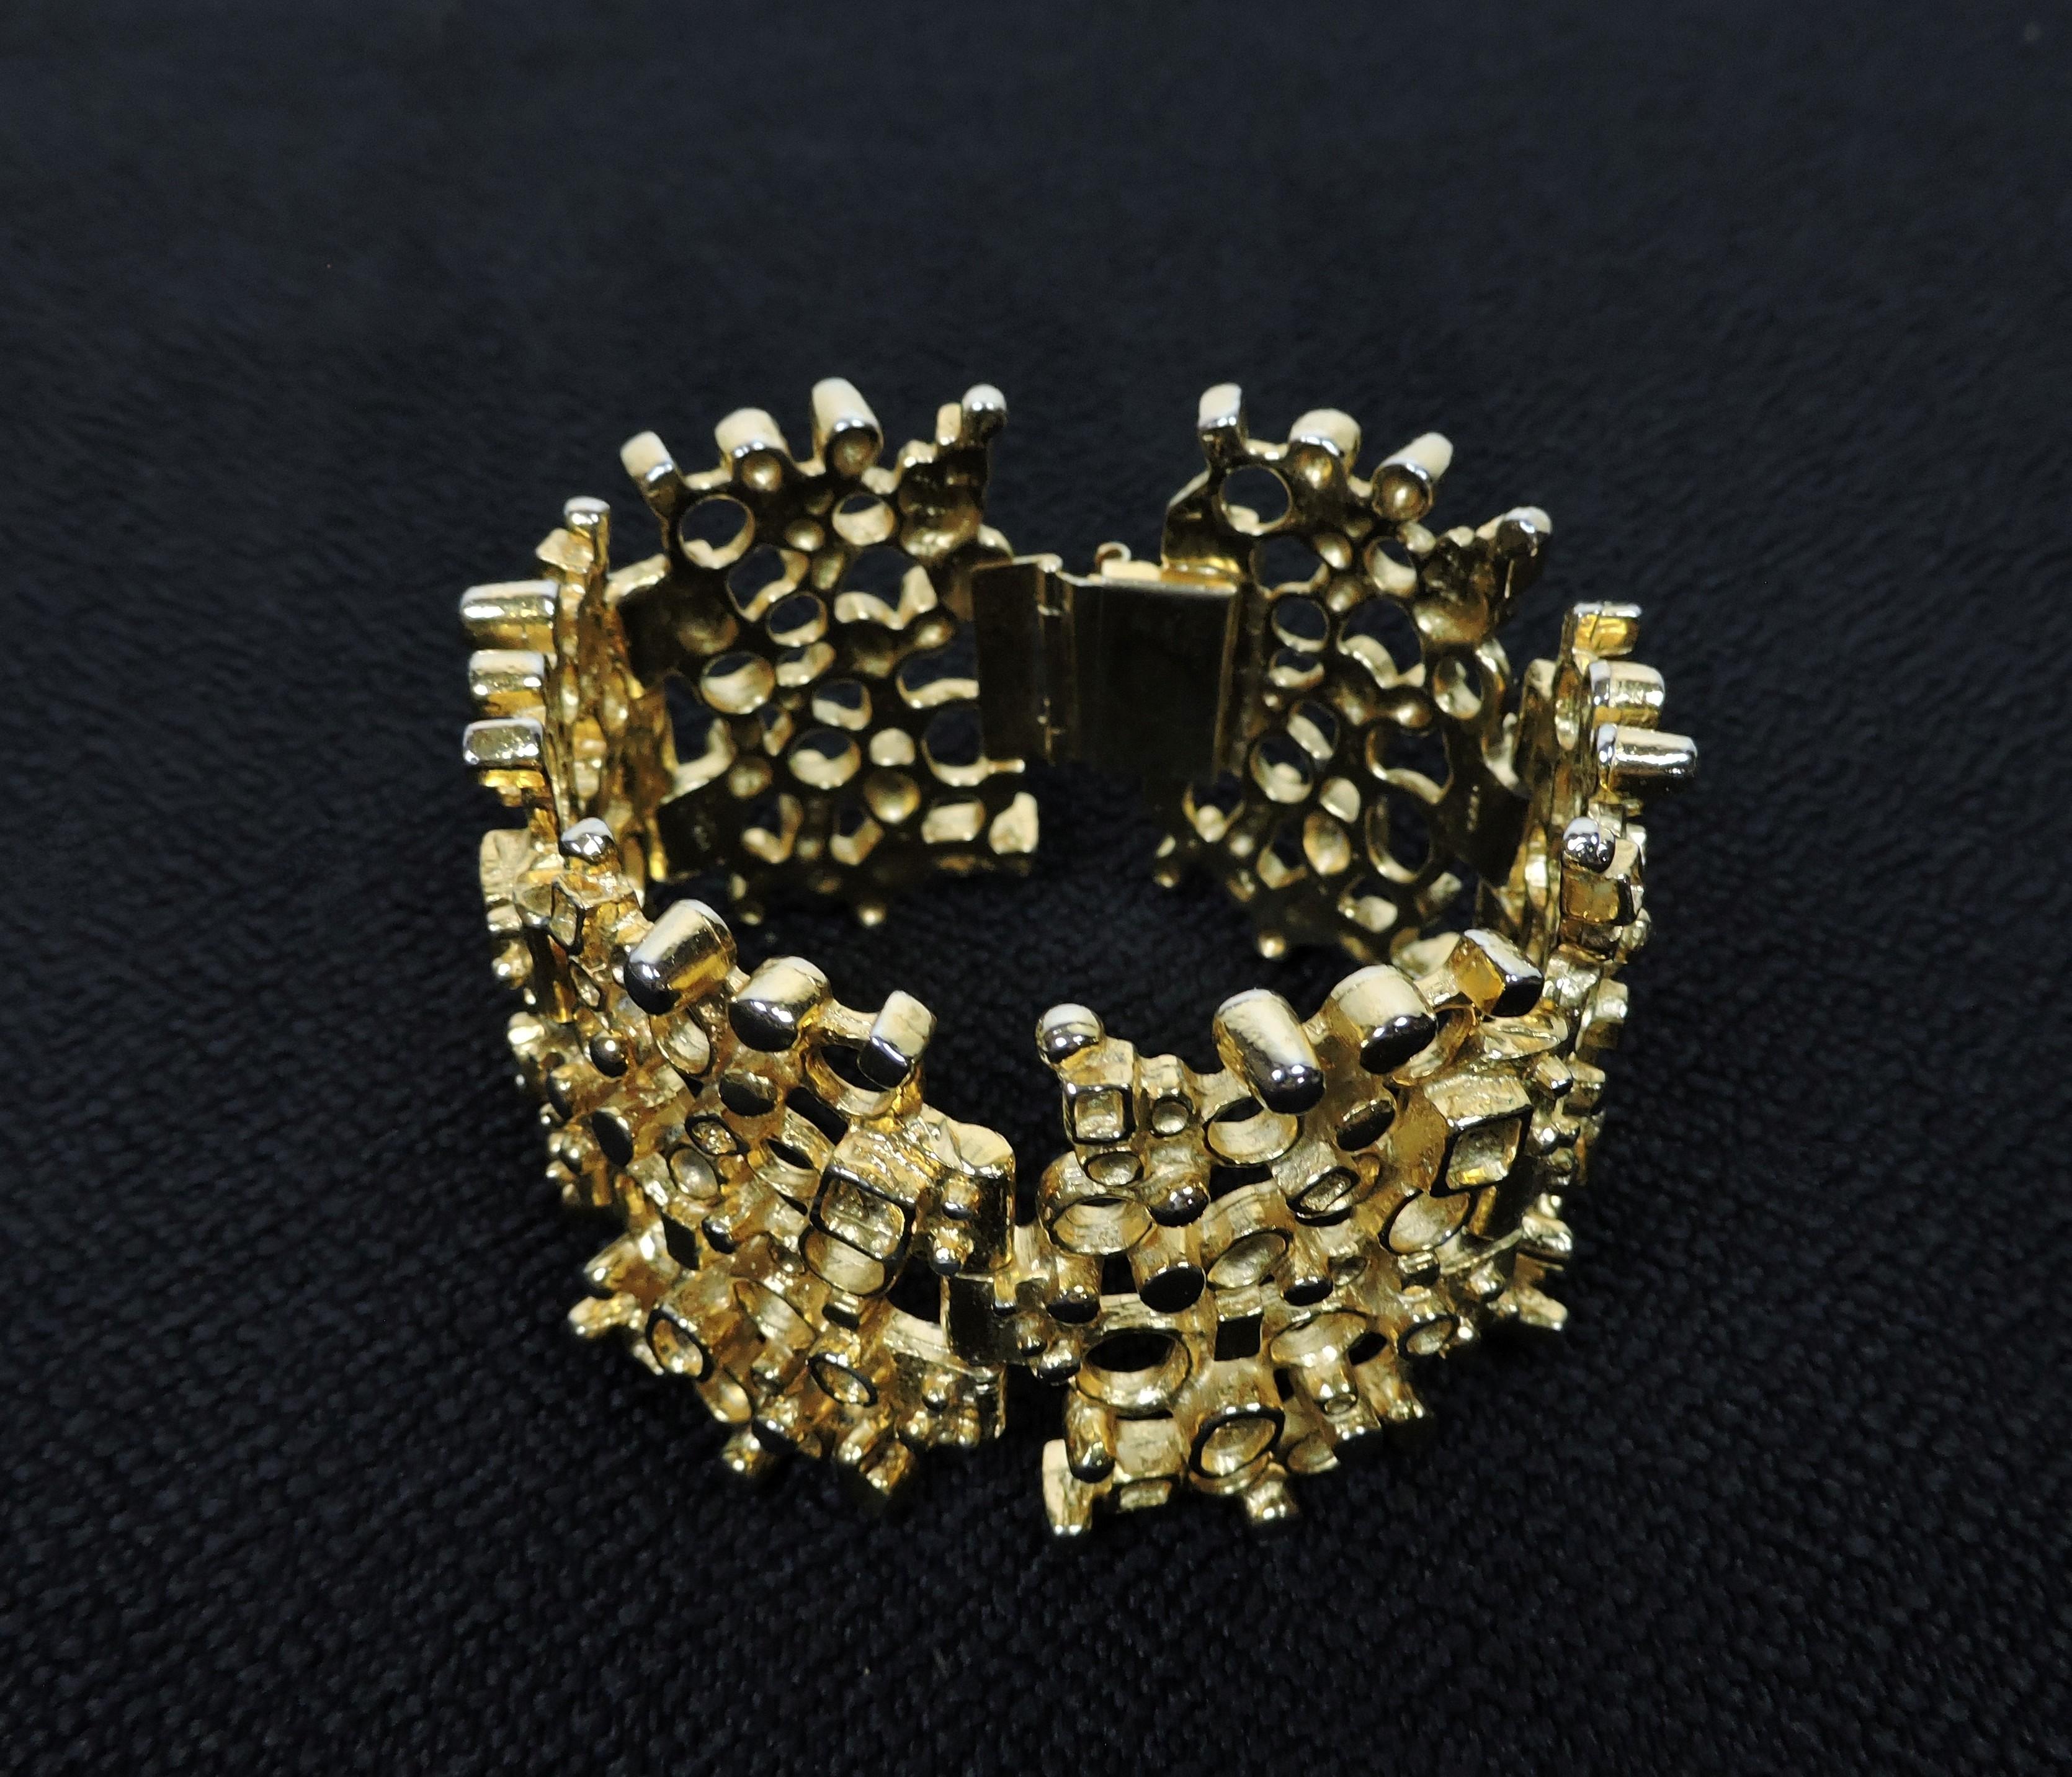 Striking and dramatic brutalist style sculptural gold tone bracelet by acclaimed Canadian jewelry artist, Robert Larin. The dimension when closed is 3.75 inches diameter. Made of hand cast pewter and signed RLA, for Robert Larin Atelier, on the